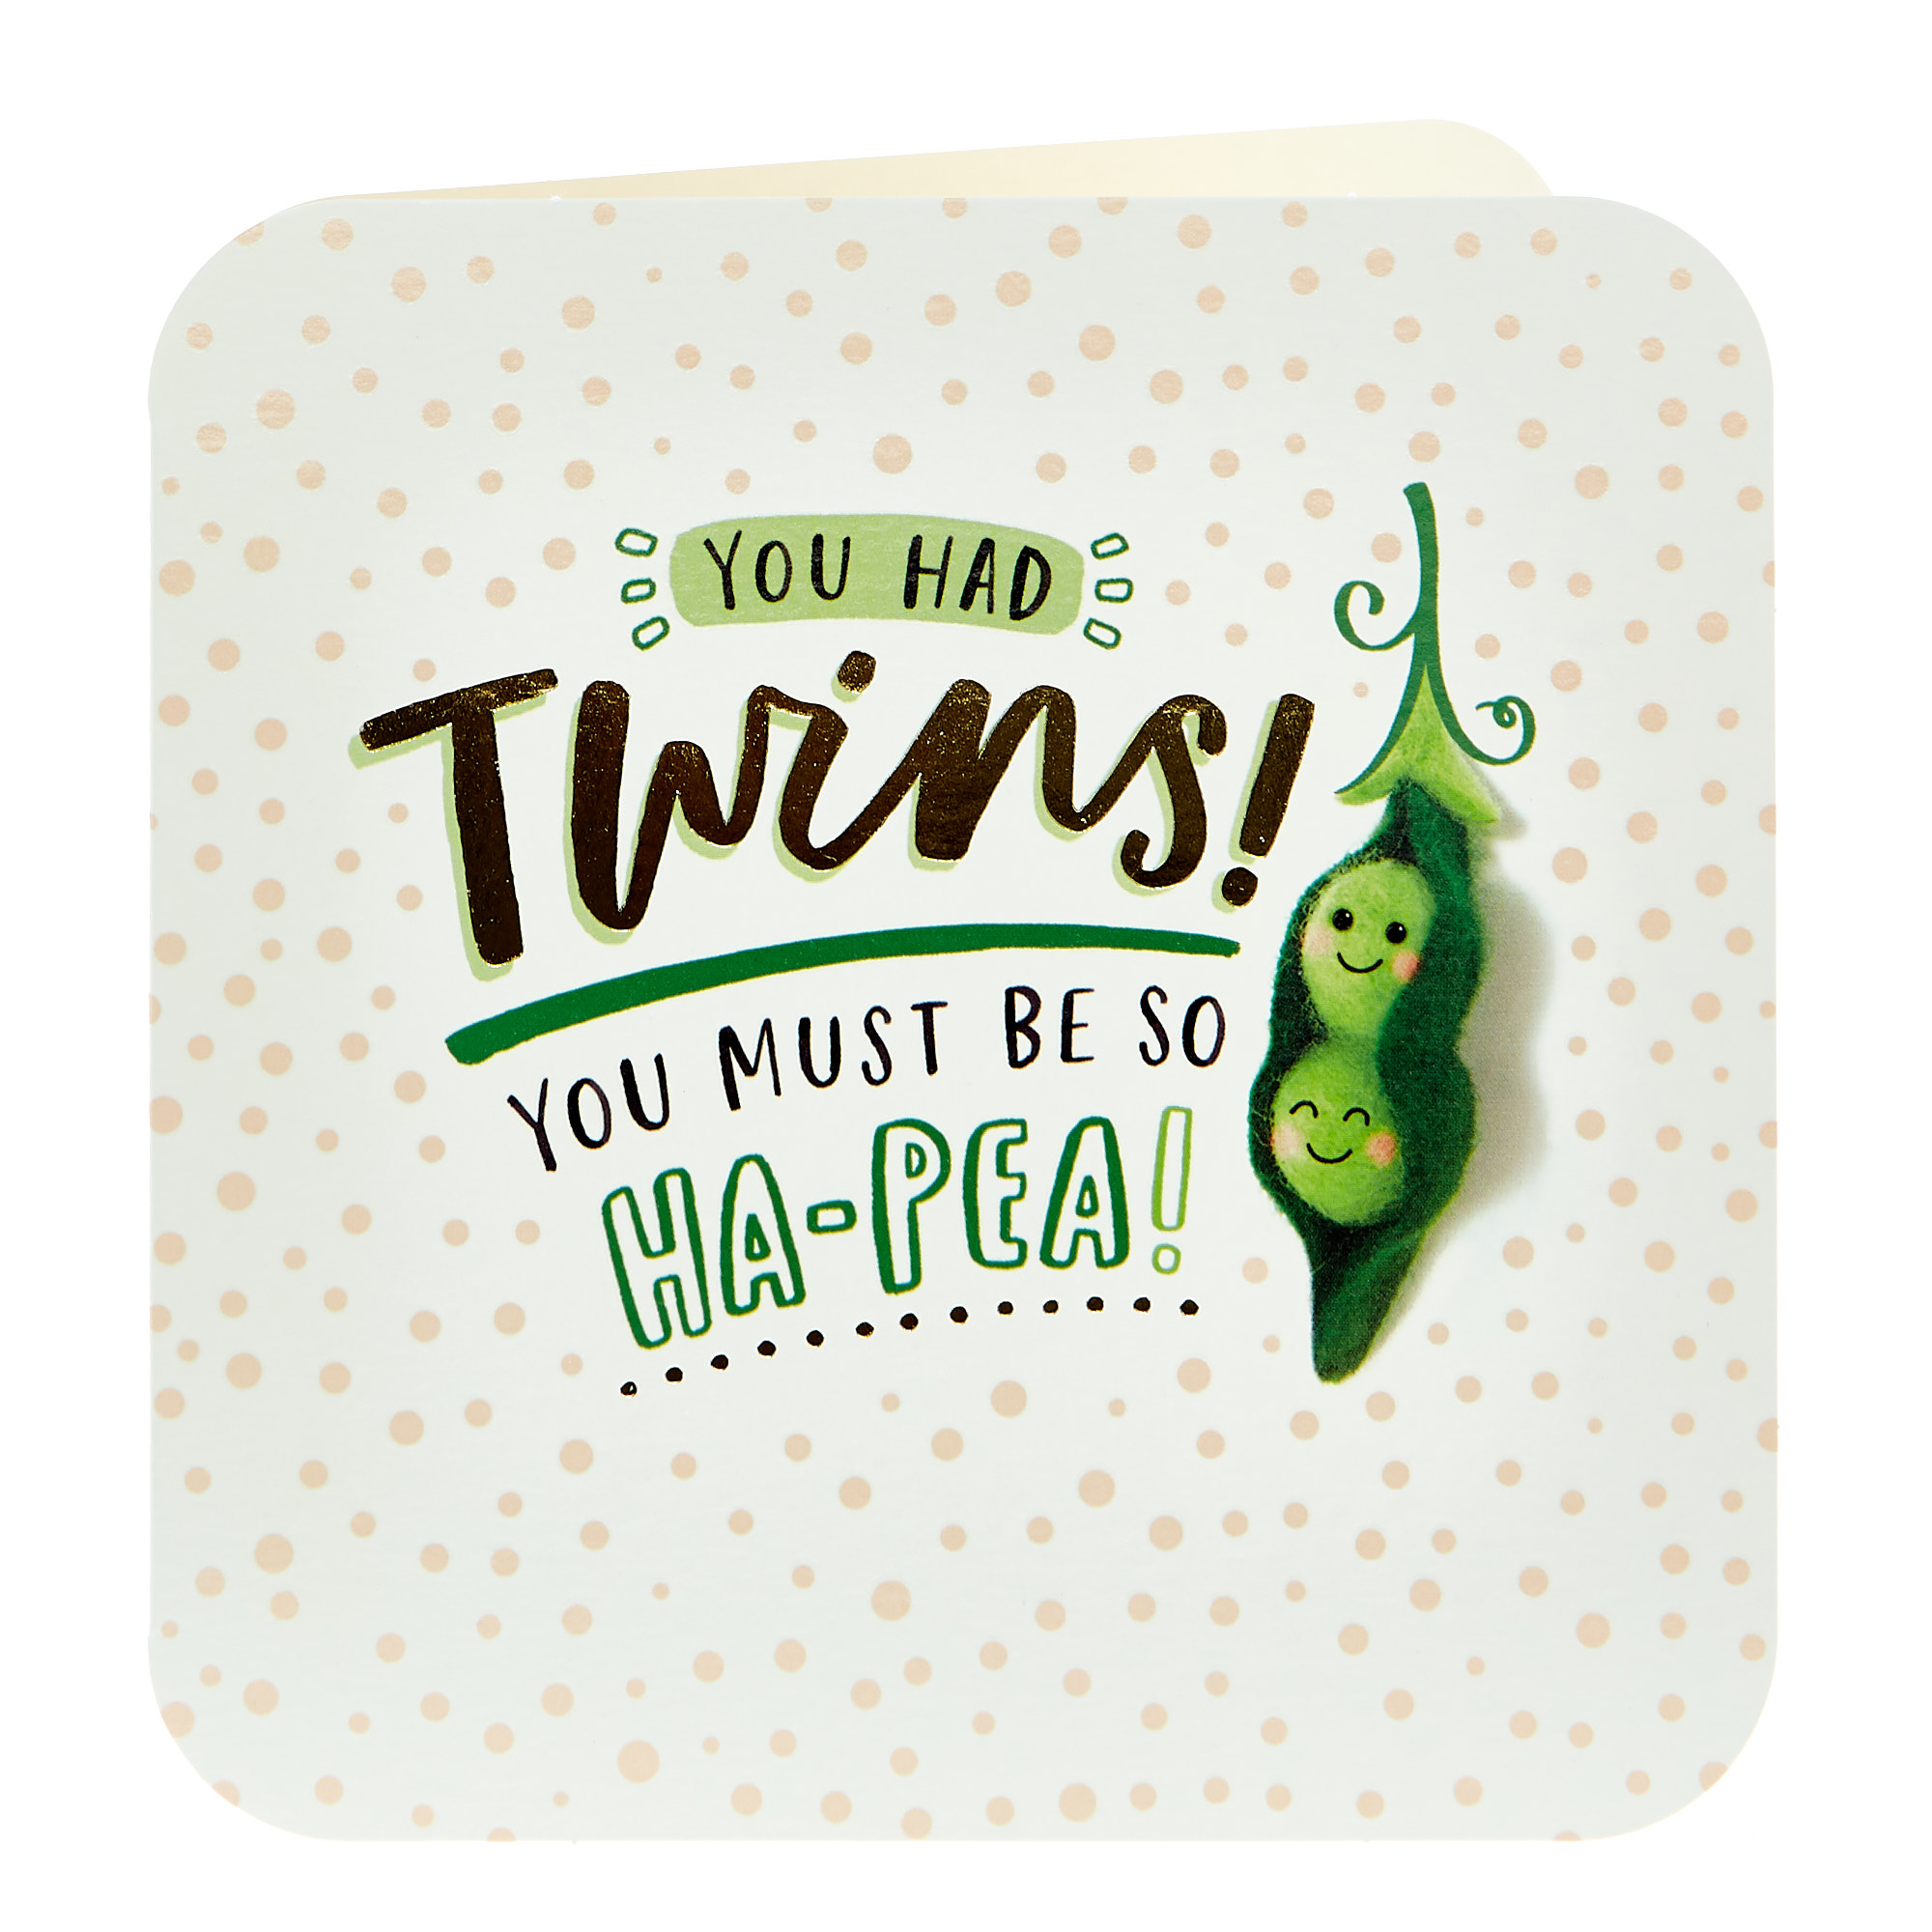 New Baby Card - You Had Twins!